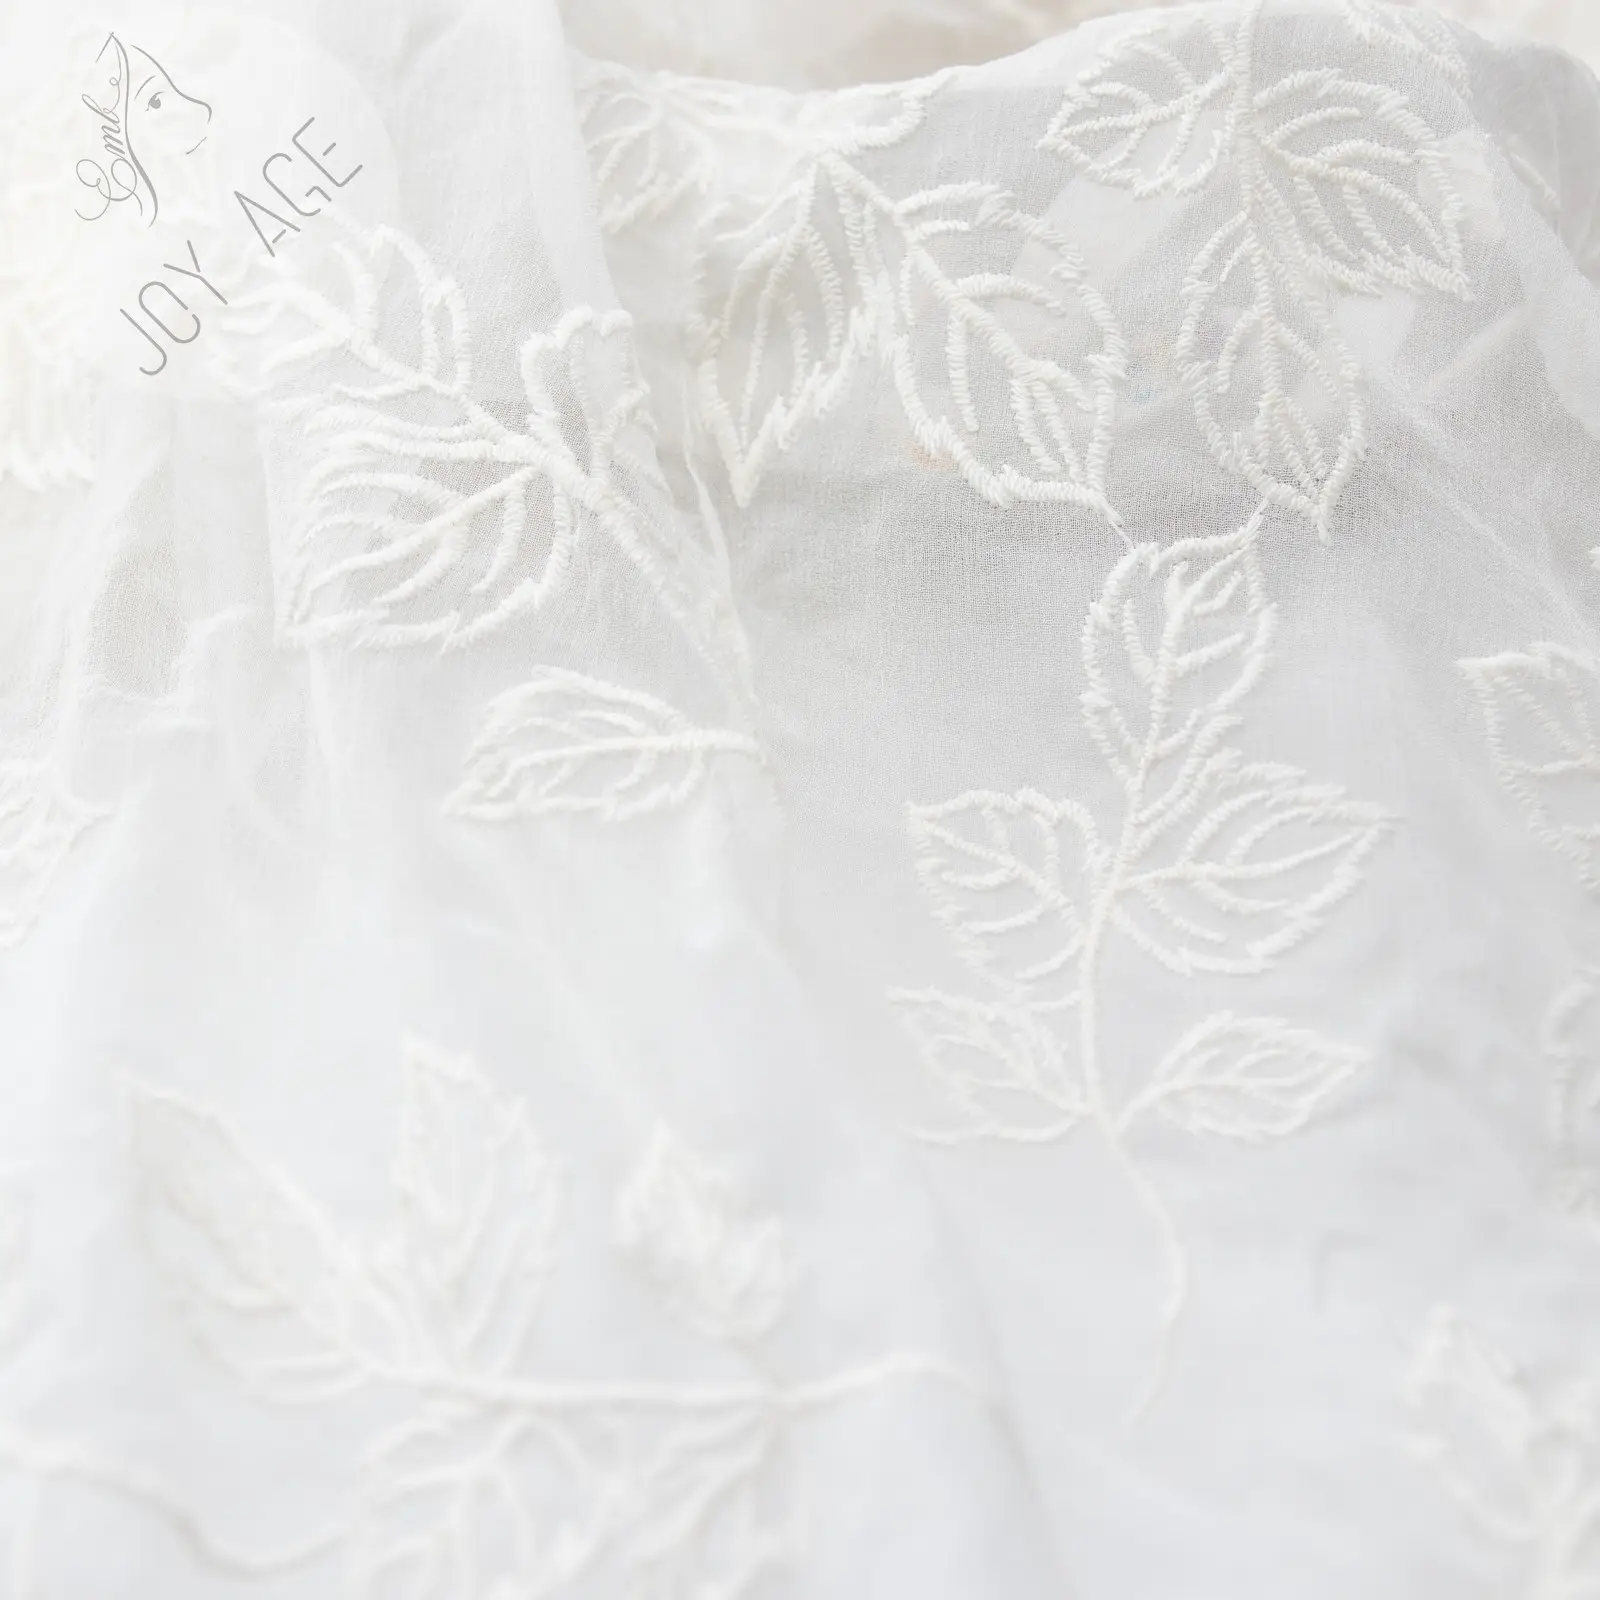 New 2021 Full Luxury Organza Transparent Embroidered Lace Cotton Abstract Tulle Fabric's Bridal Dress Turkey Curtain